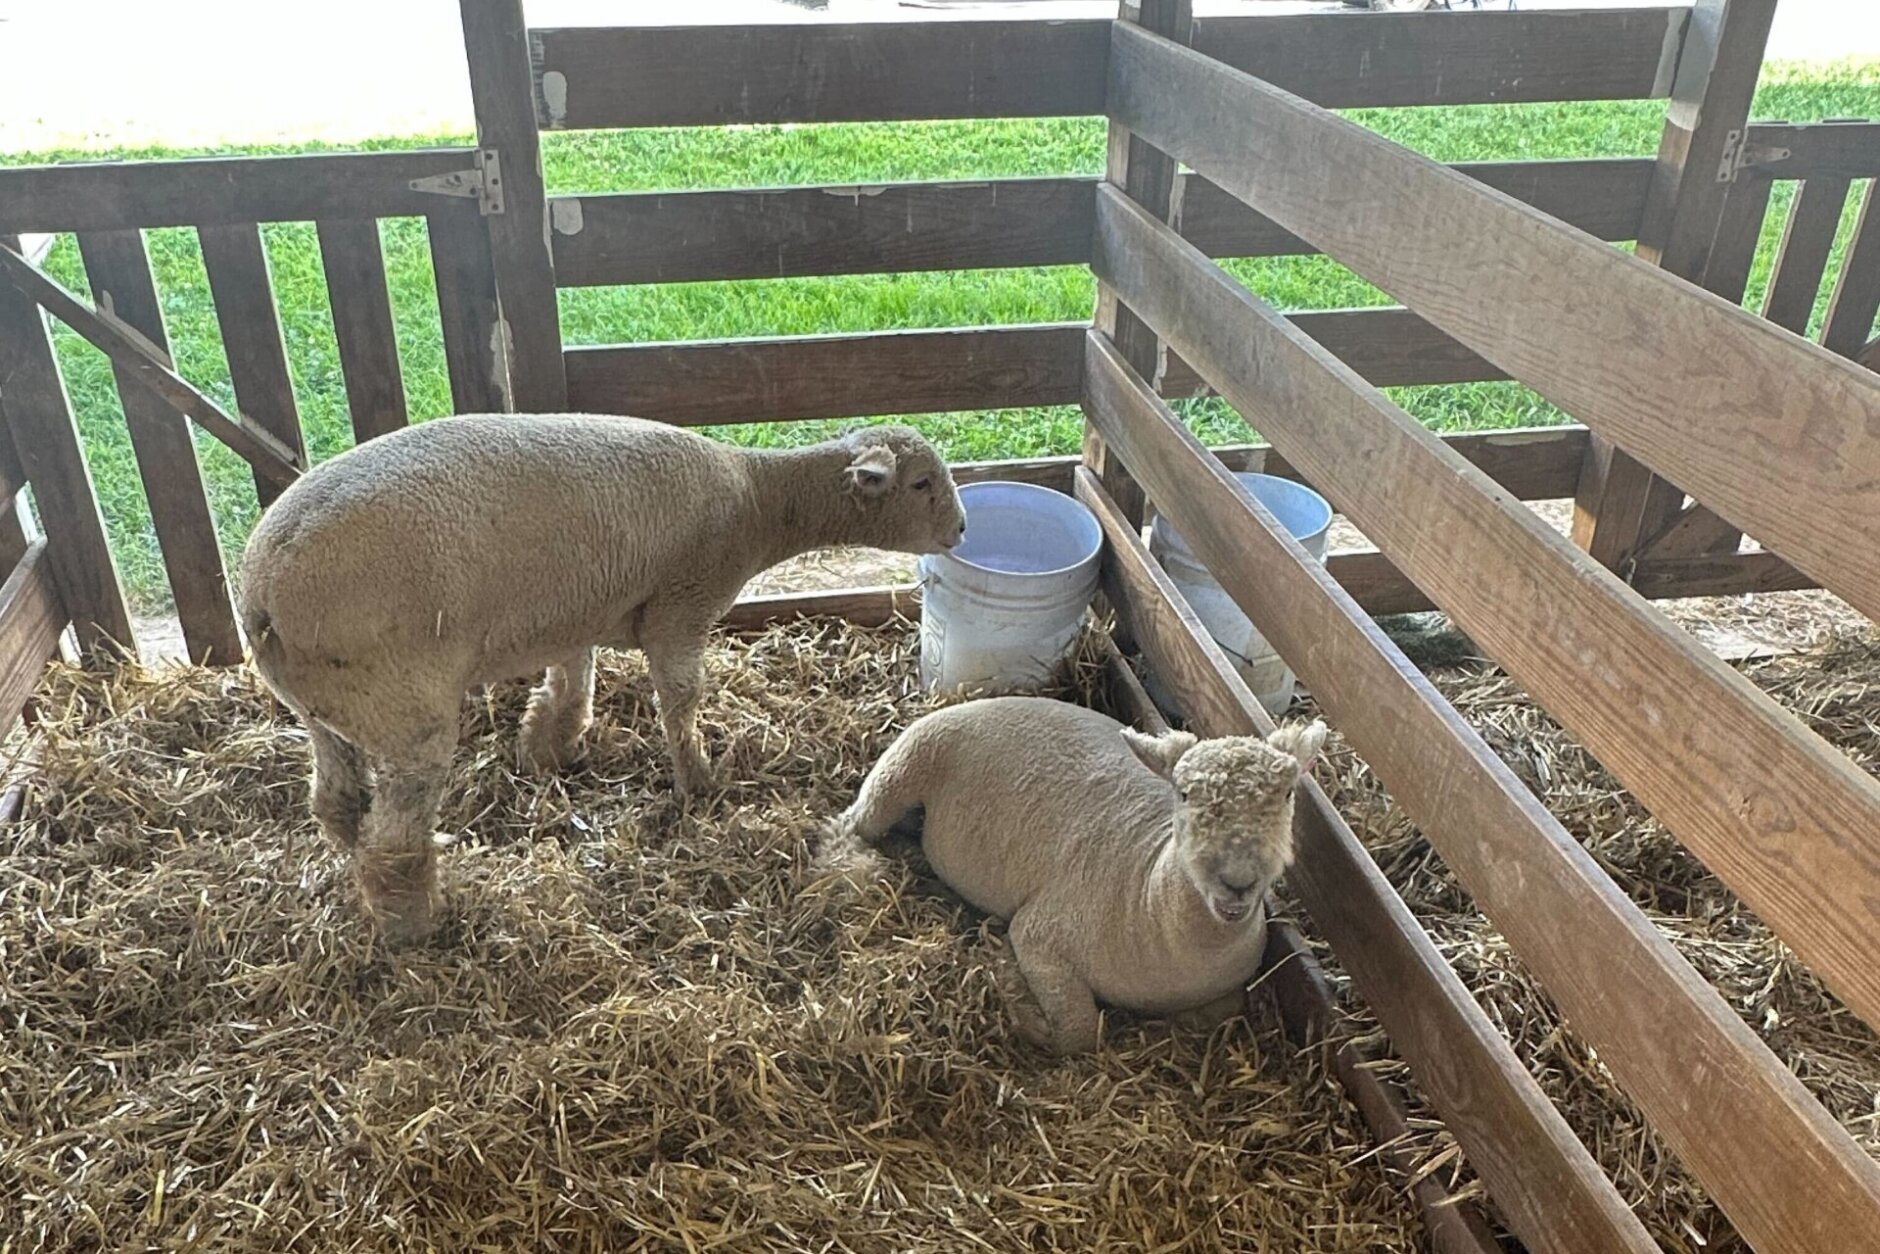 Sheep at the Montgomery County Agriculture Fair (WTOP/Matt Kaufax)